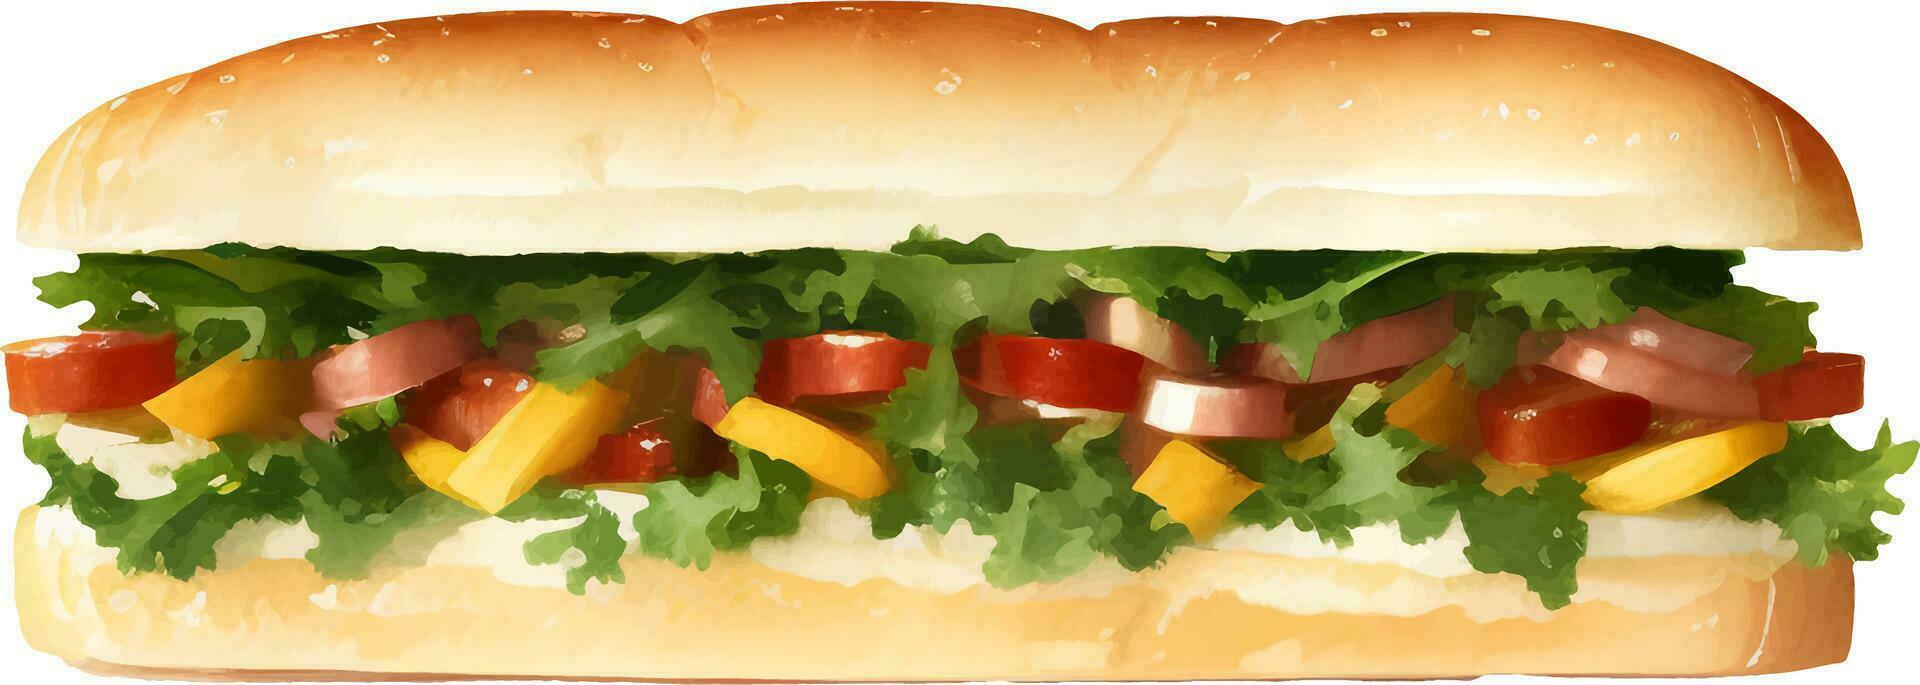 Sub Sandwich Detailed Hand Drawn Illustration Vector Isolated